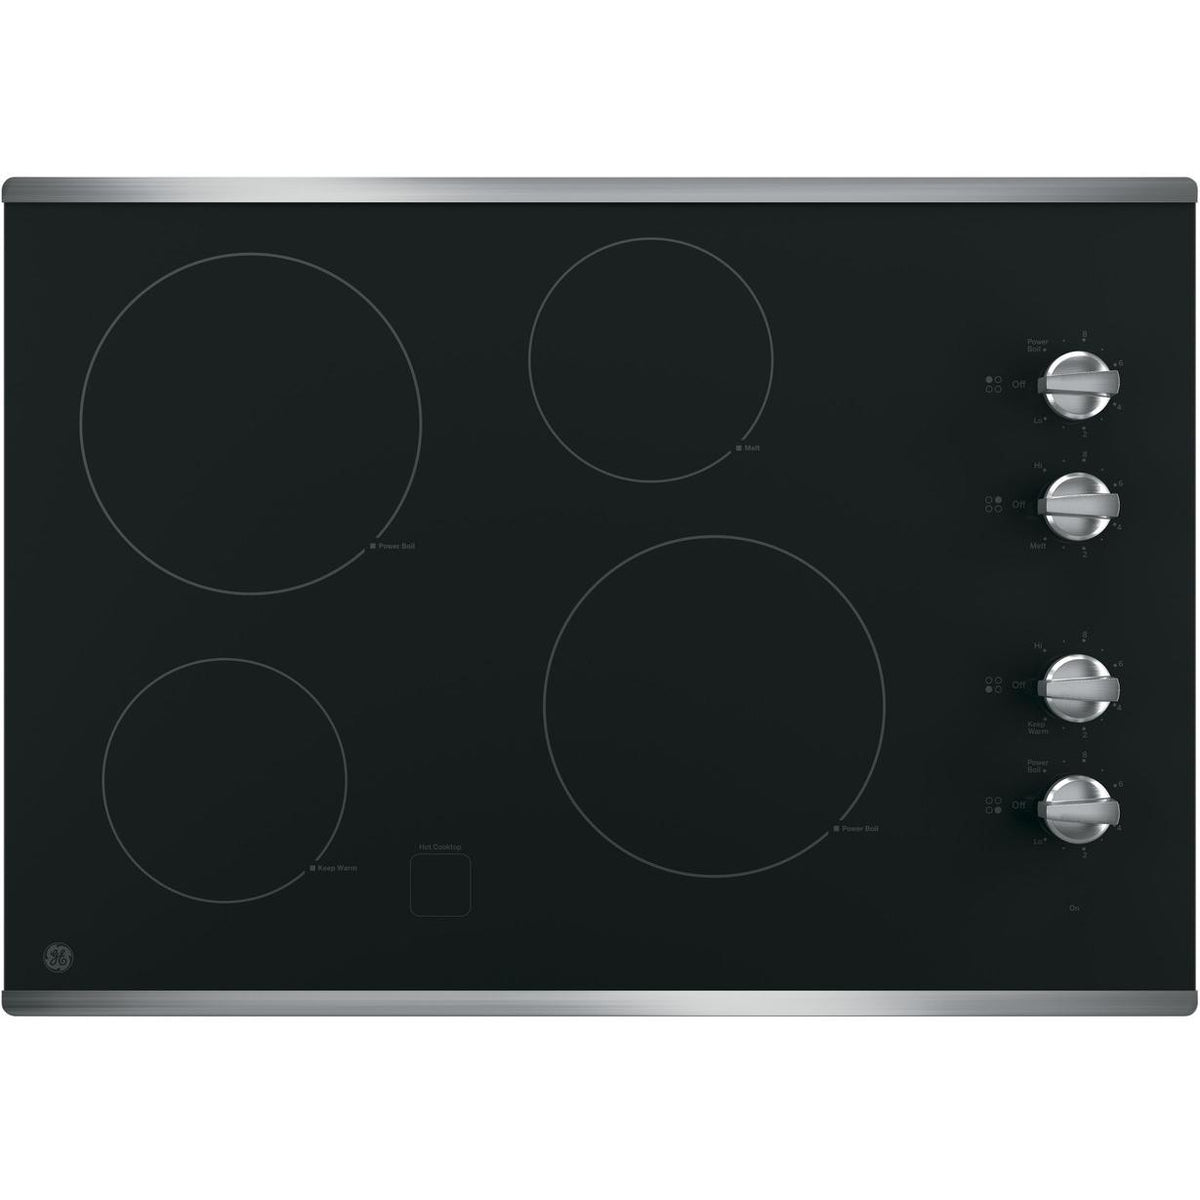 30-inch Built-in Electric Cooktop JP3030SWSS IMAGE 1